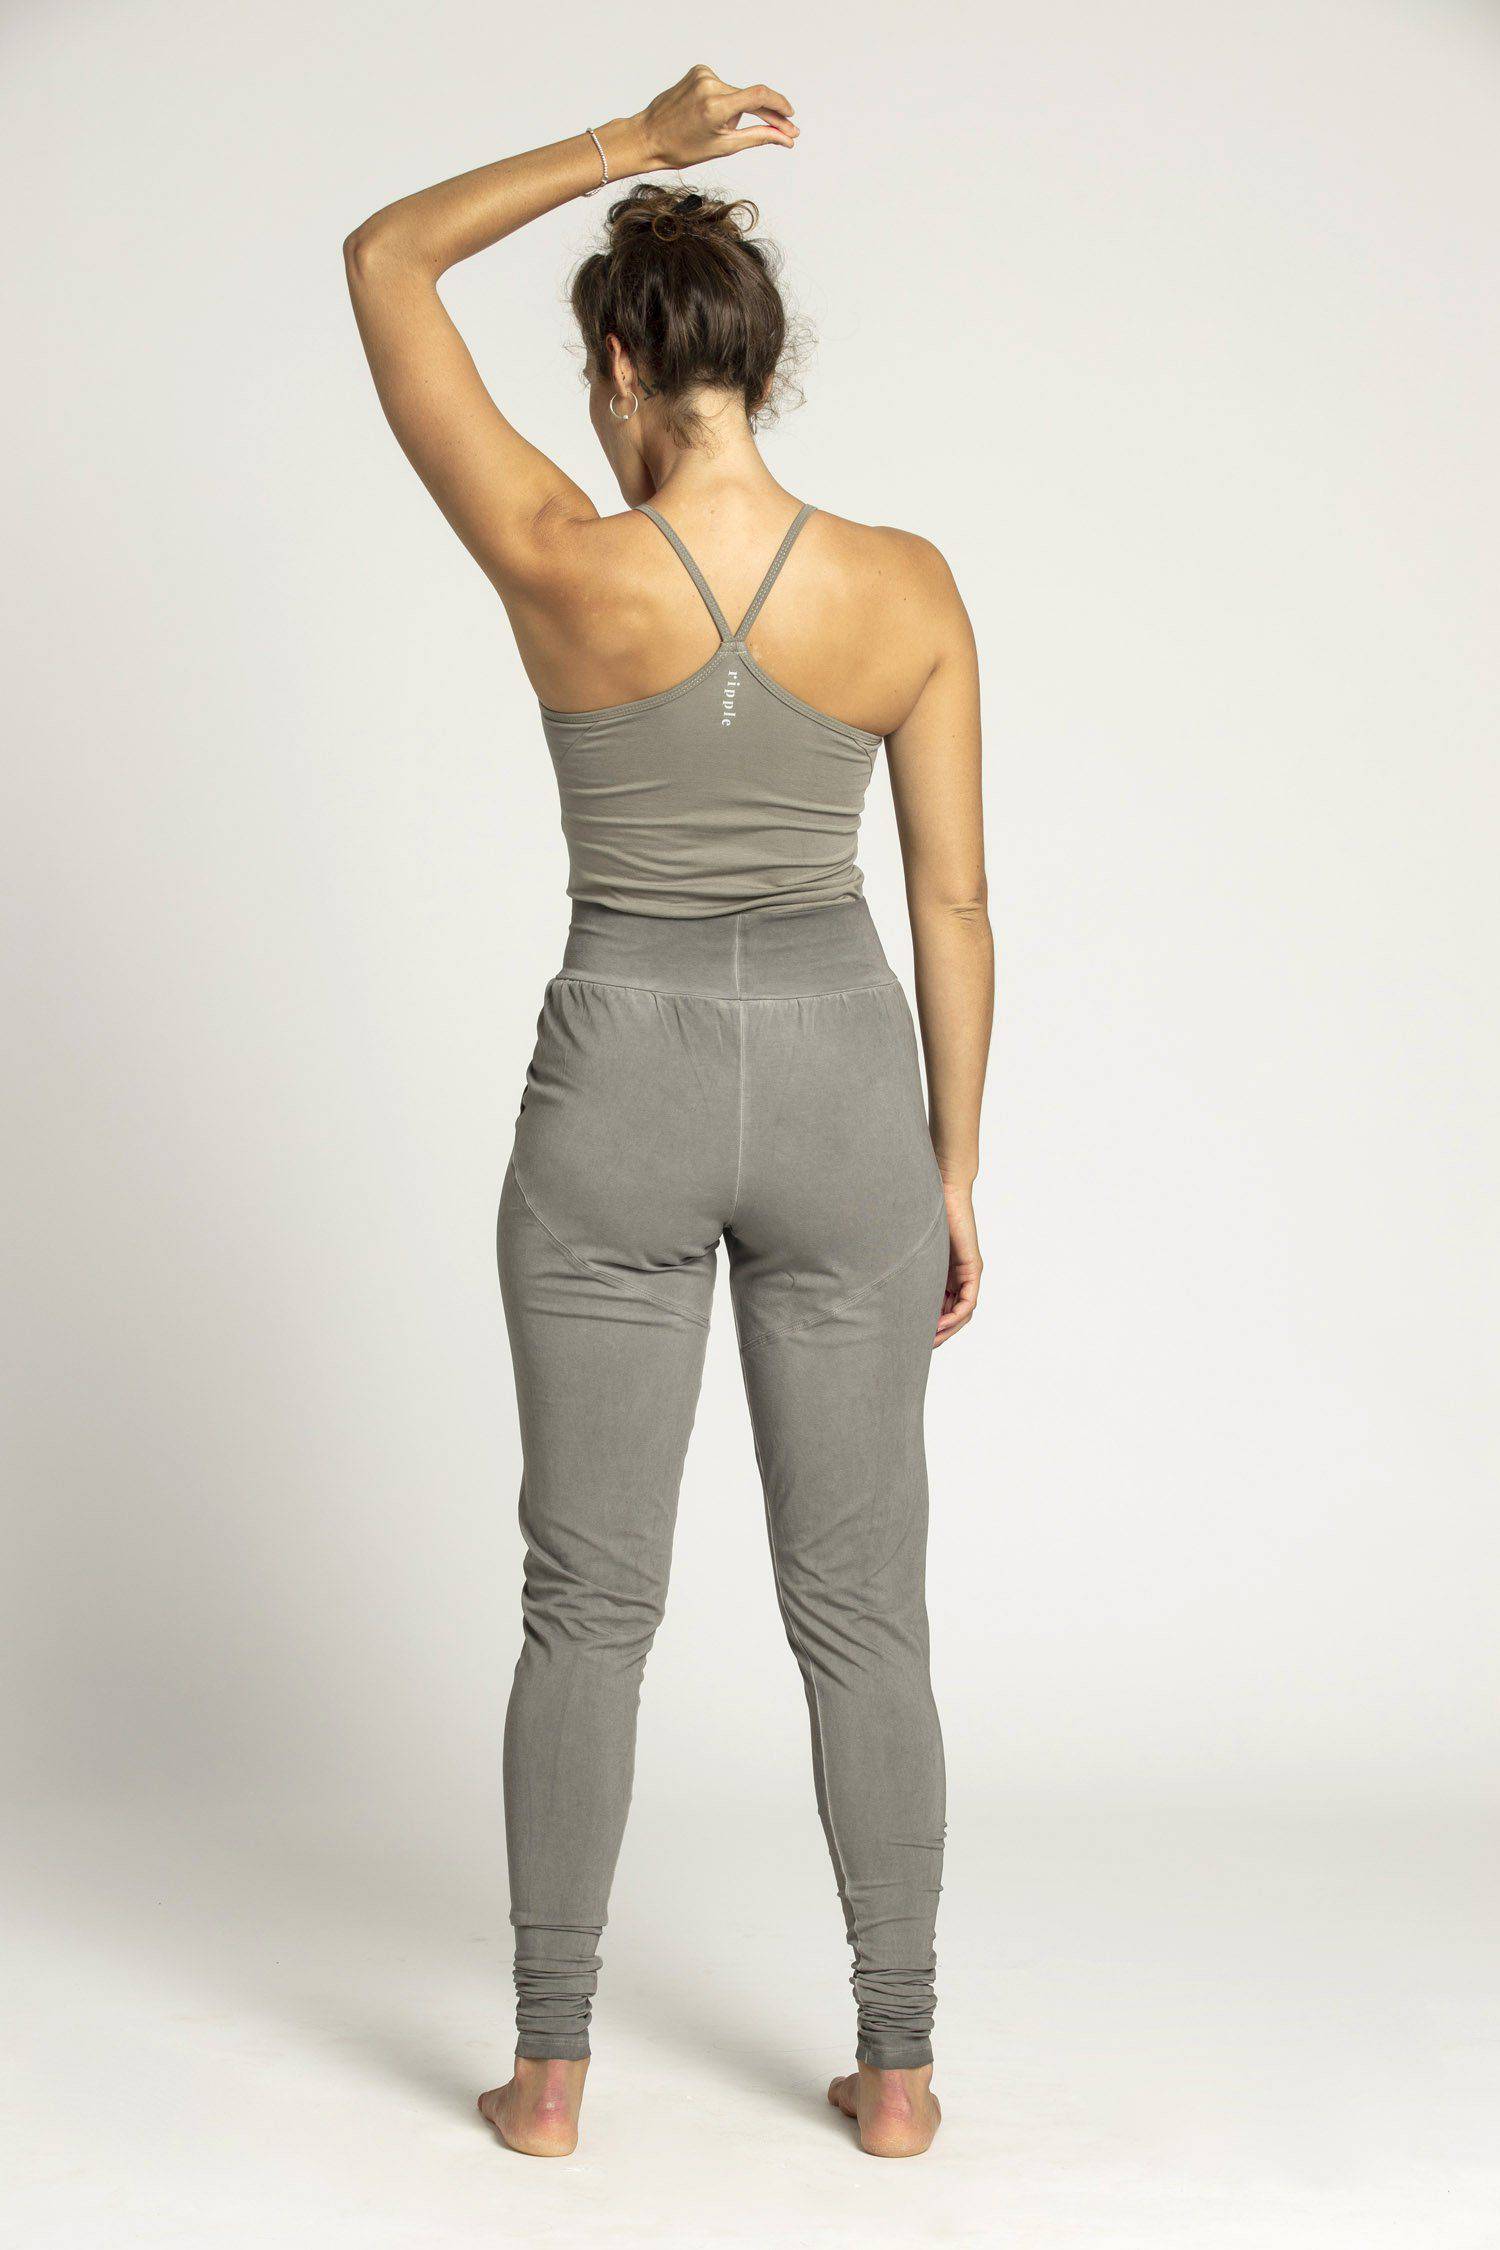 Sport-Specific Workout Wear with a Sustainability Focus